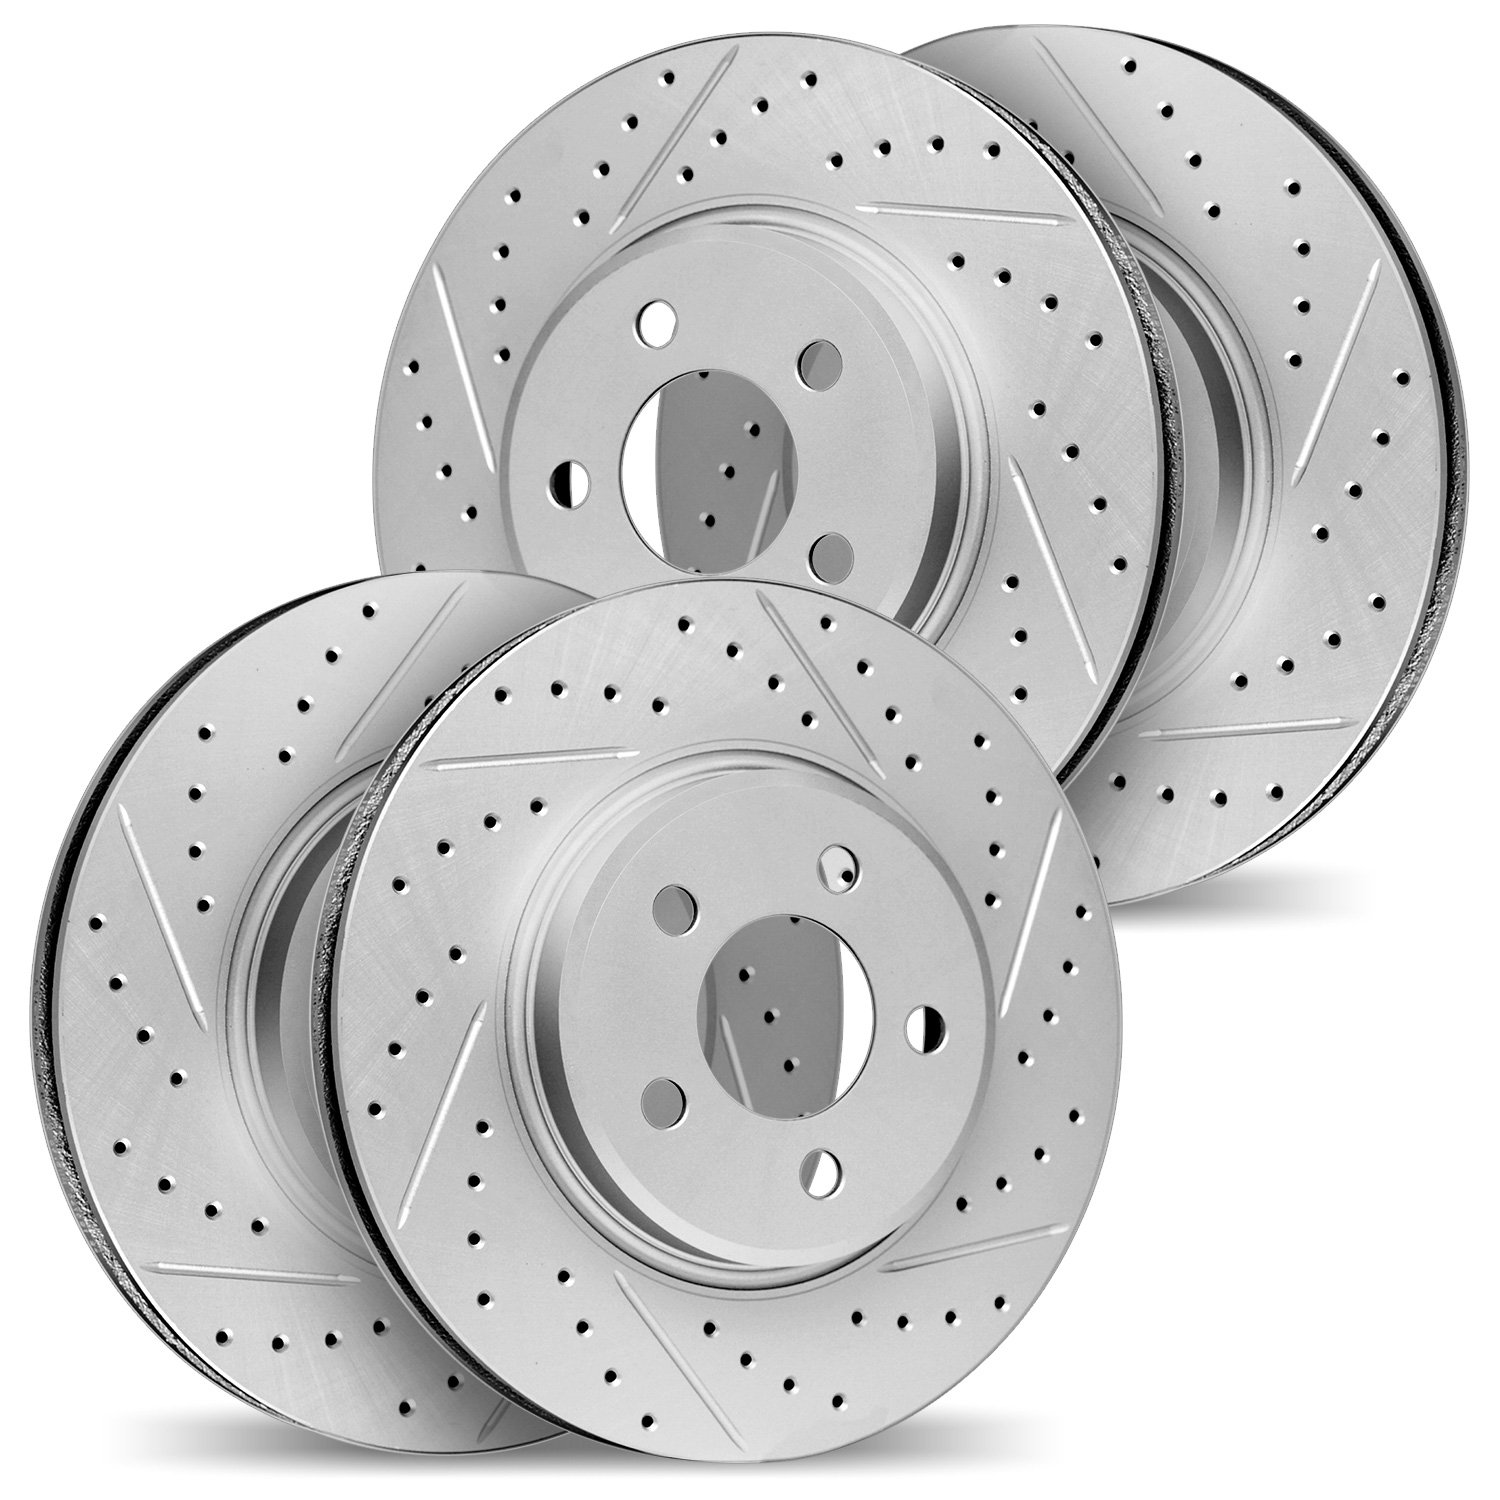 2004-27030 Geoperformance Drilled/Slotted Brake Rotors, 2003-2008 Volvo, Position: Front and Rear